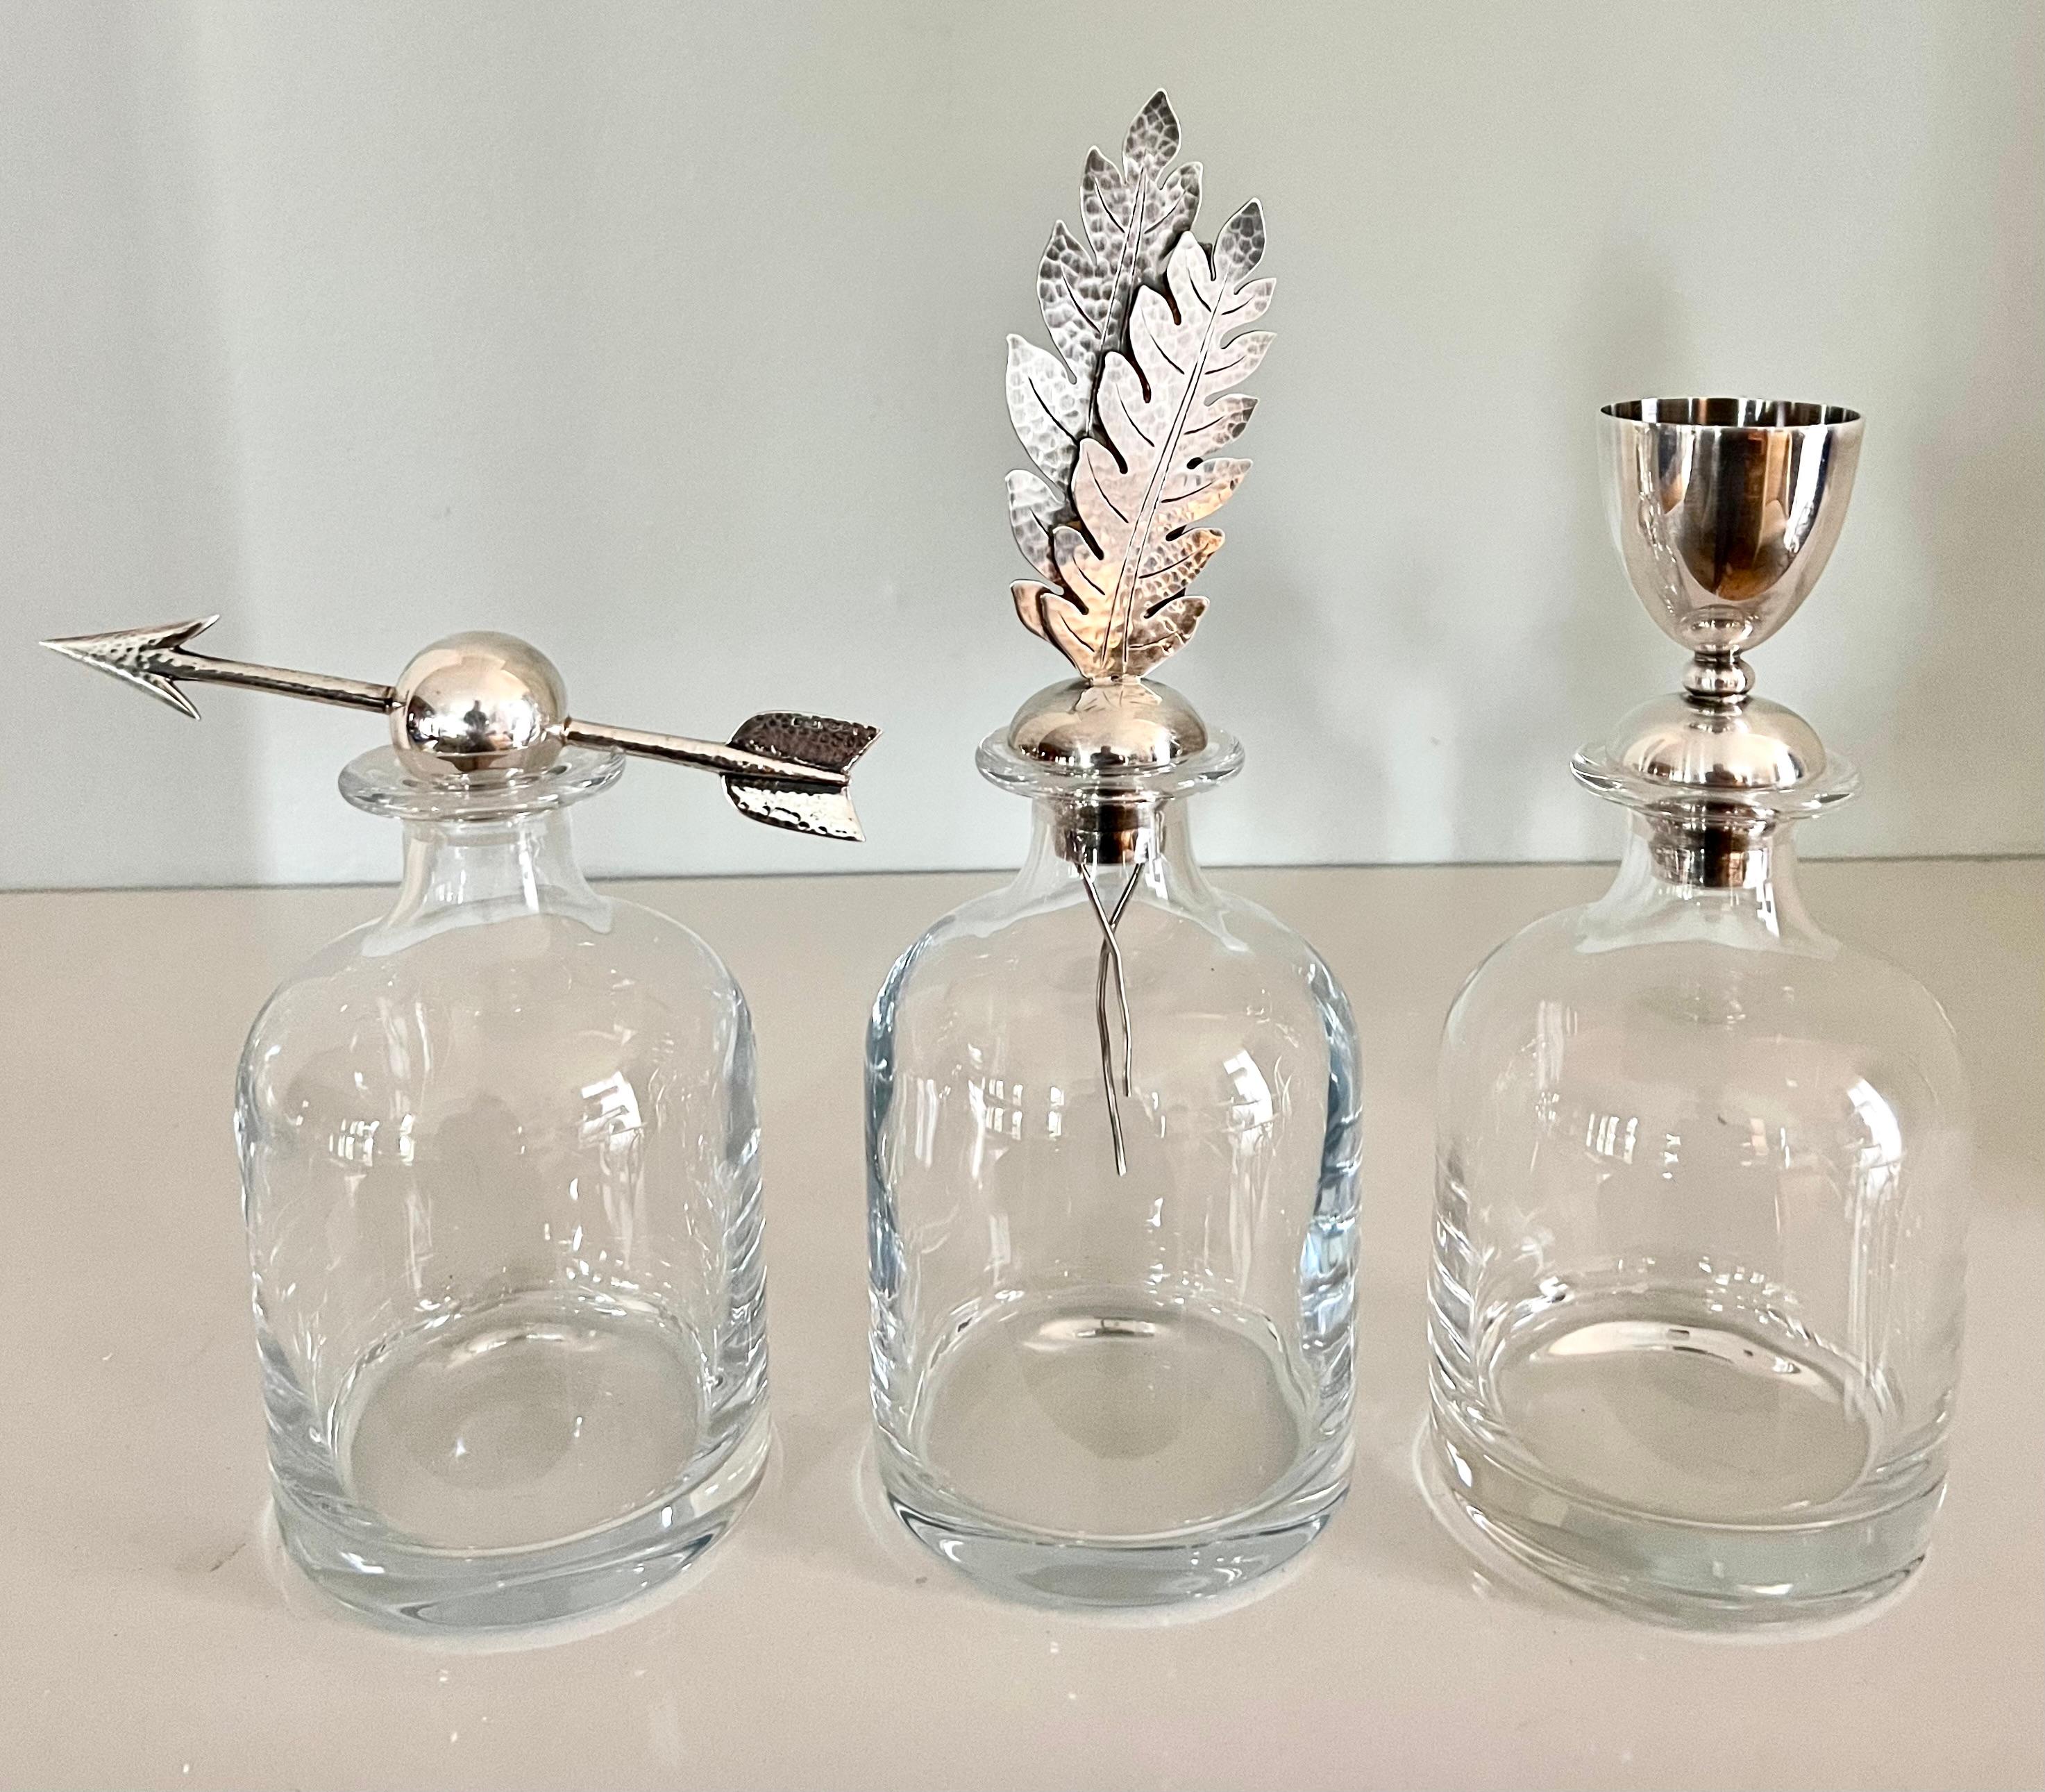 Modern Crystal Italian Pampaloni Decanter with Hammered Silver Ball and Arrow Stopper